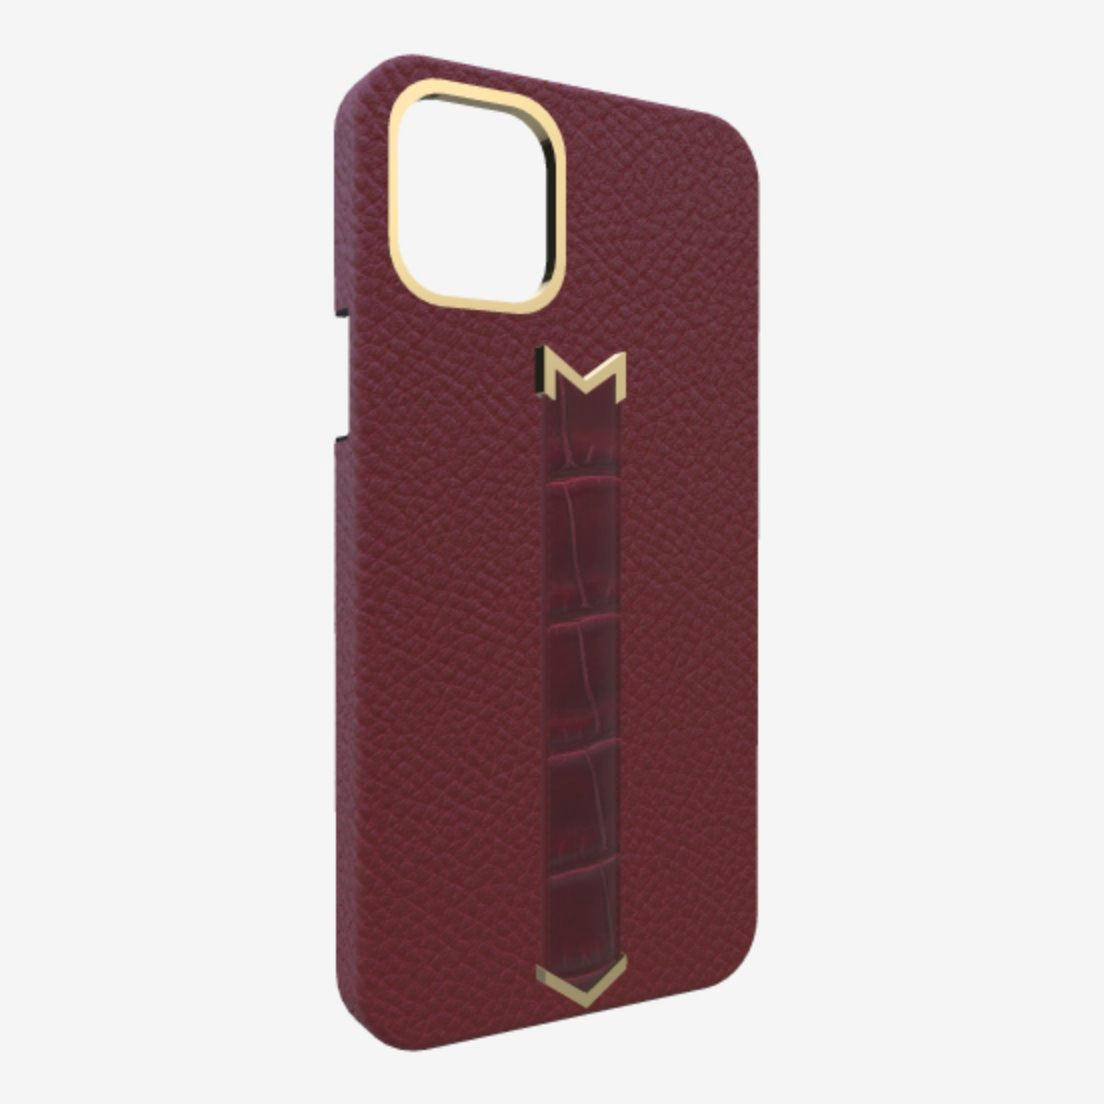 Gold Finger Strap Case for iPhone 13 Pro Max in Genuine Calfskin and Alligator Burgundy Palace Burgundy Palace 